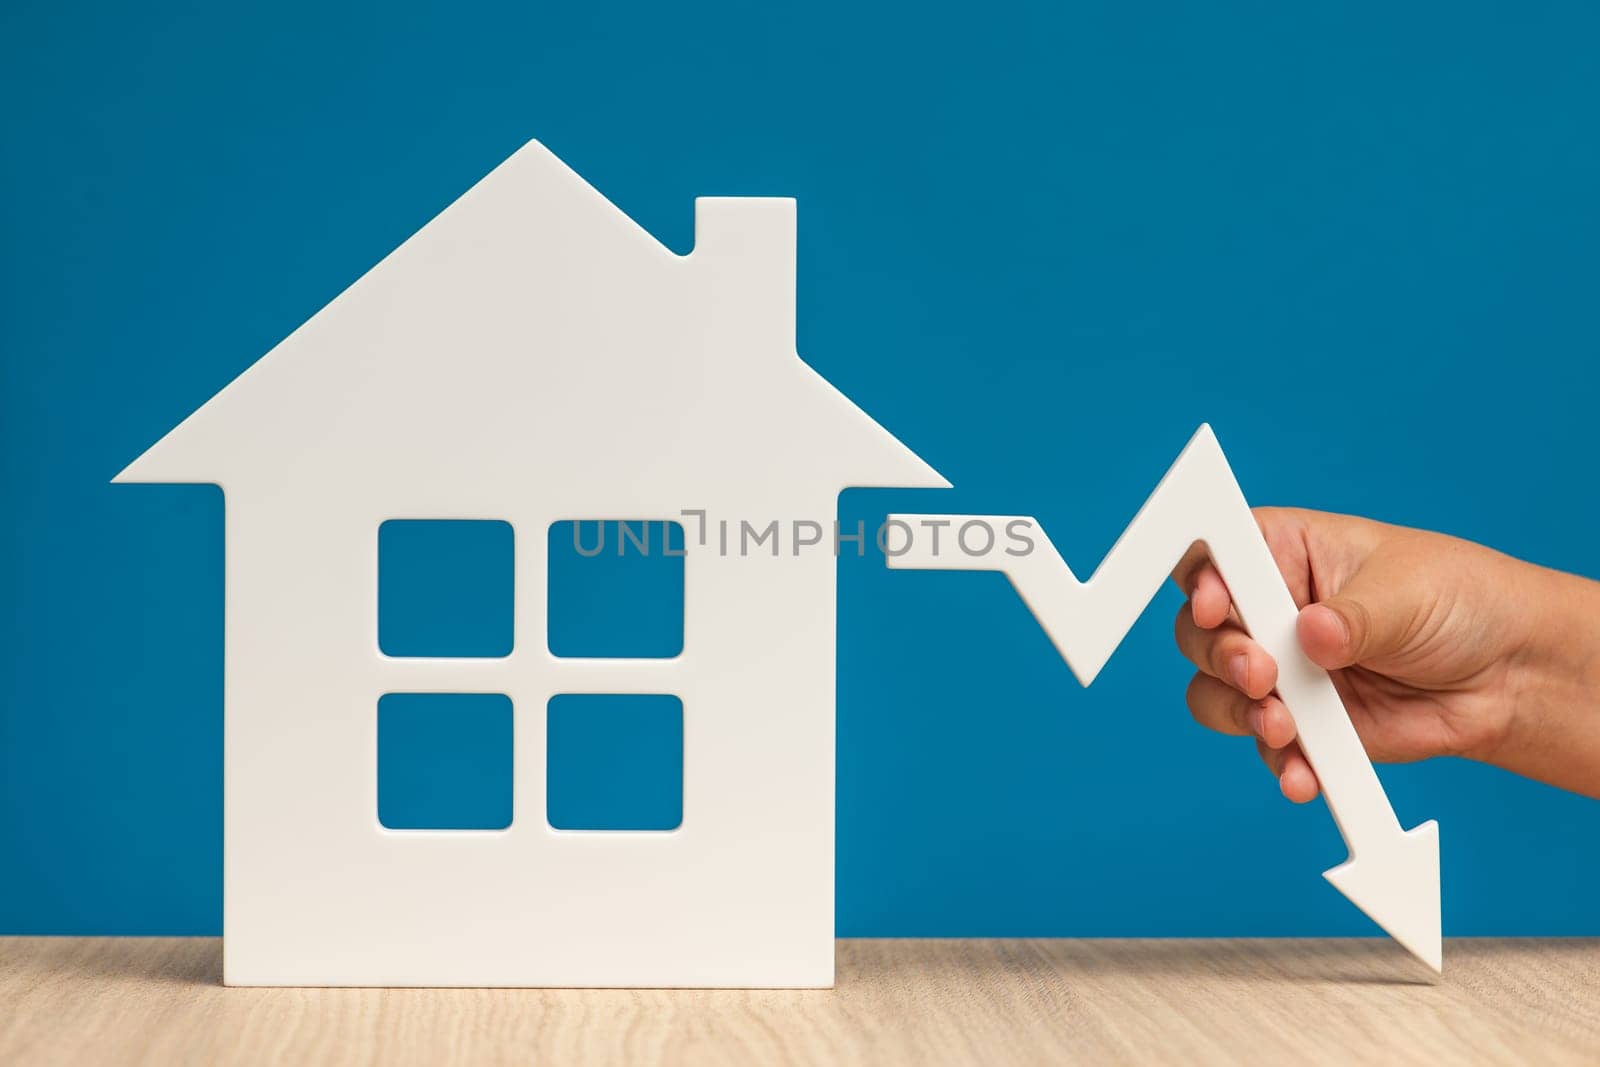 The collapse in real estate prices. Sale in the housing market. Reducing the value of real estate. Model of a house on a blue background and hand holding a white graph arrow pointing down